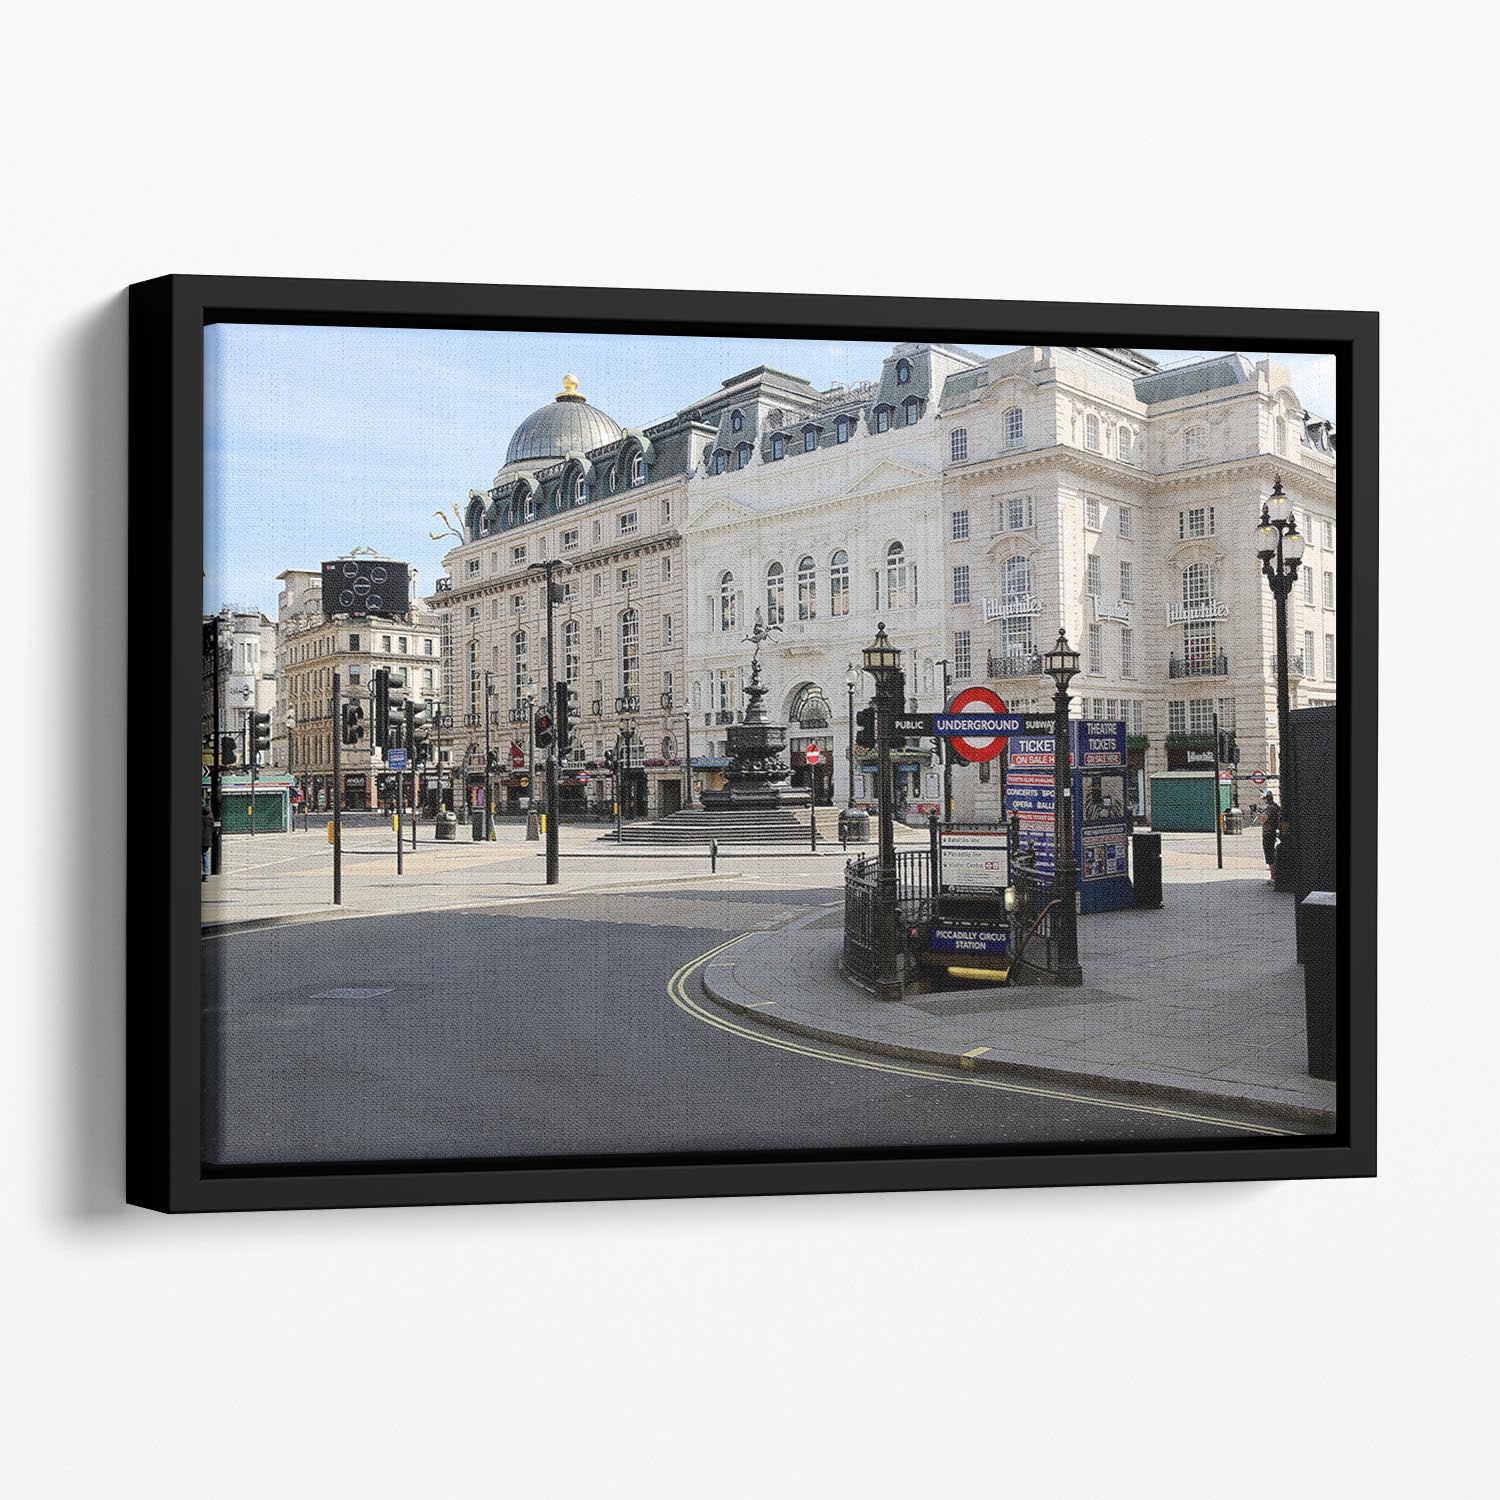 Eros Piccadilly Circus London under Lockdown 2020 Floating Framed Canvas - Canvas Art Rocks - 1